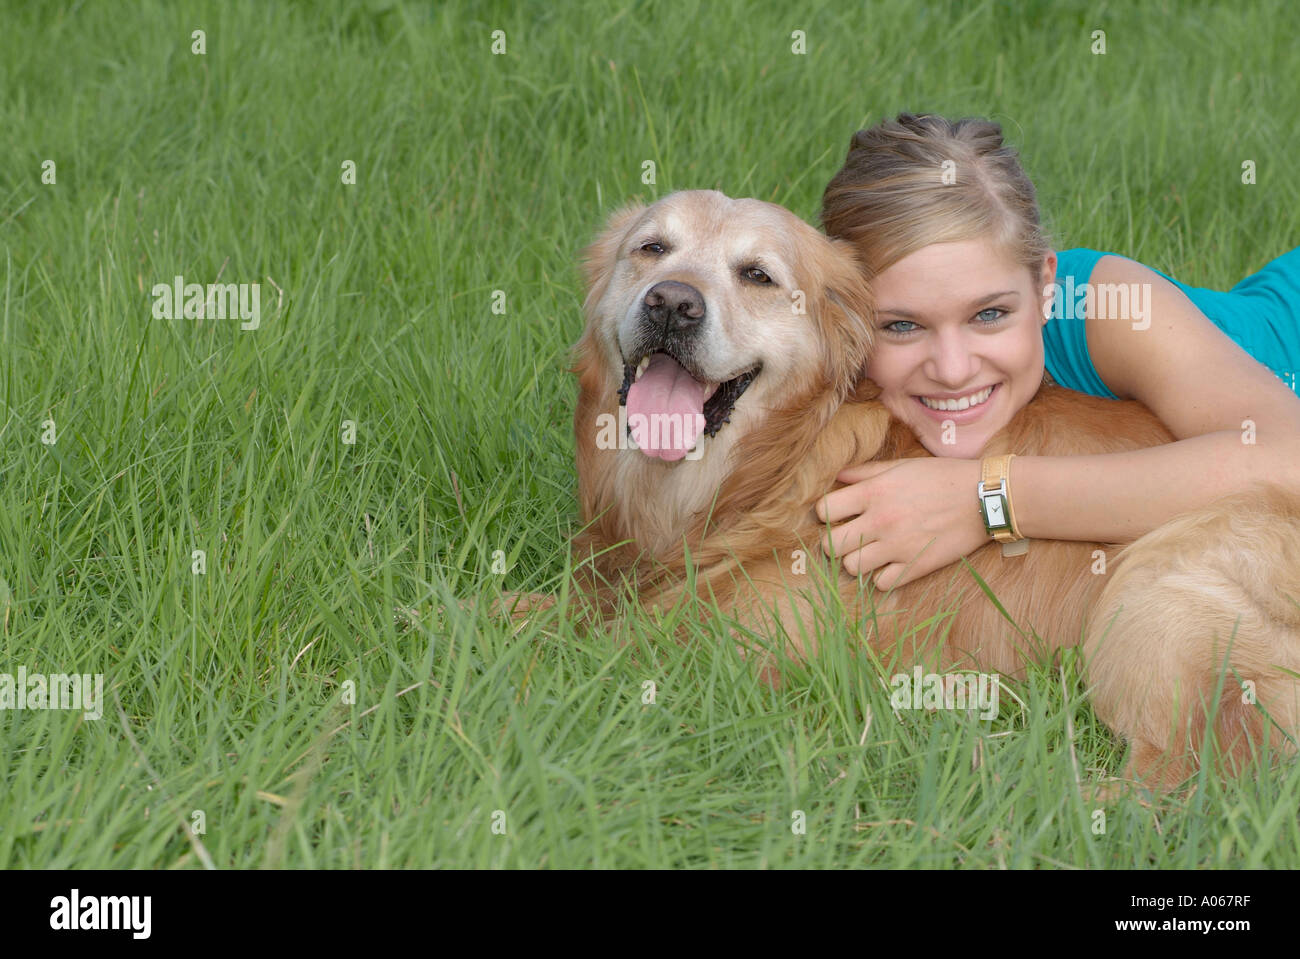 A blonde woman holding her pet dog smiles at the camera Stock Photo